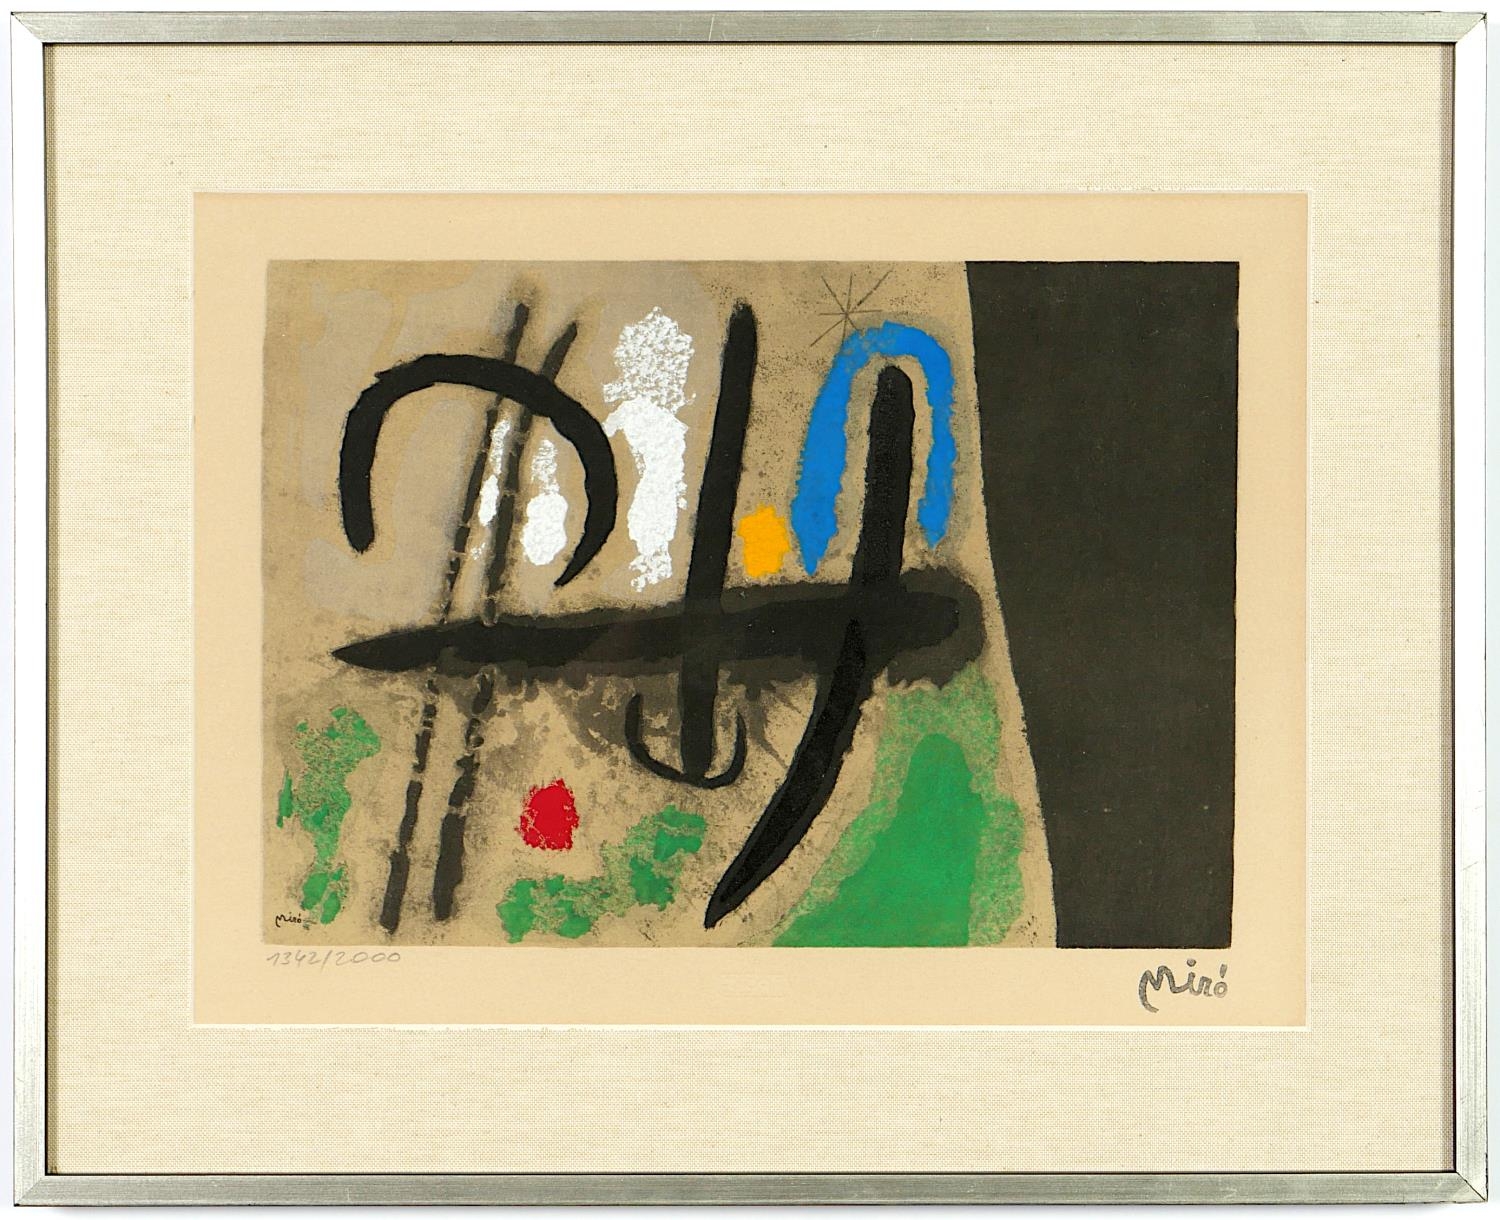 JOAN MIRO, Personnages, a pair, numbered limited edition pochoir, stamped signature, embossed - Image 2 of 3